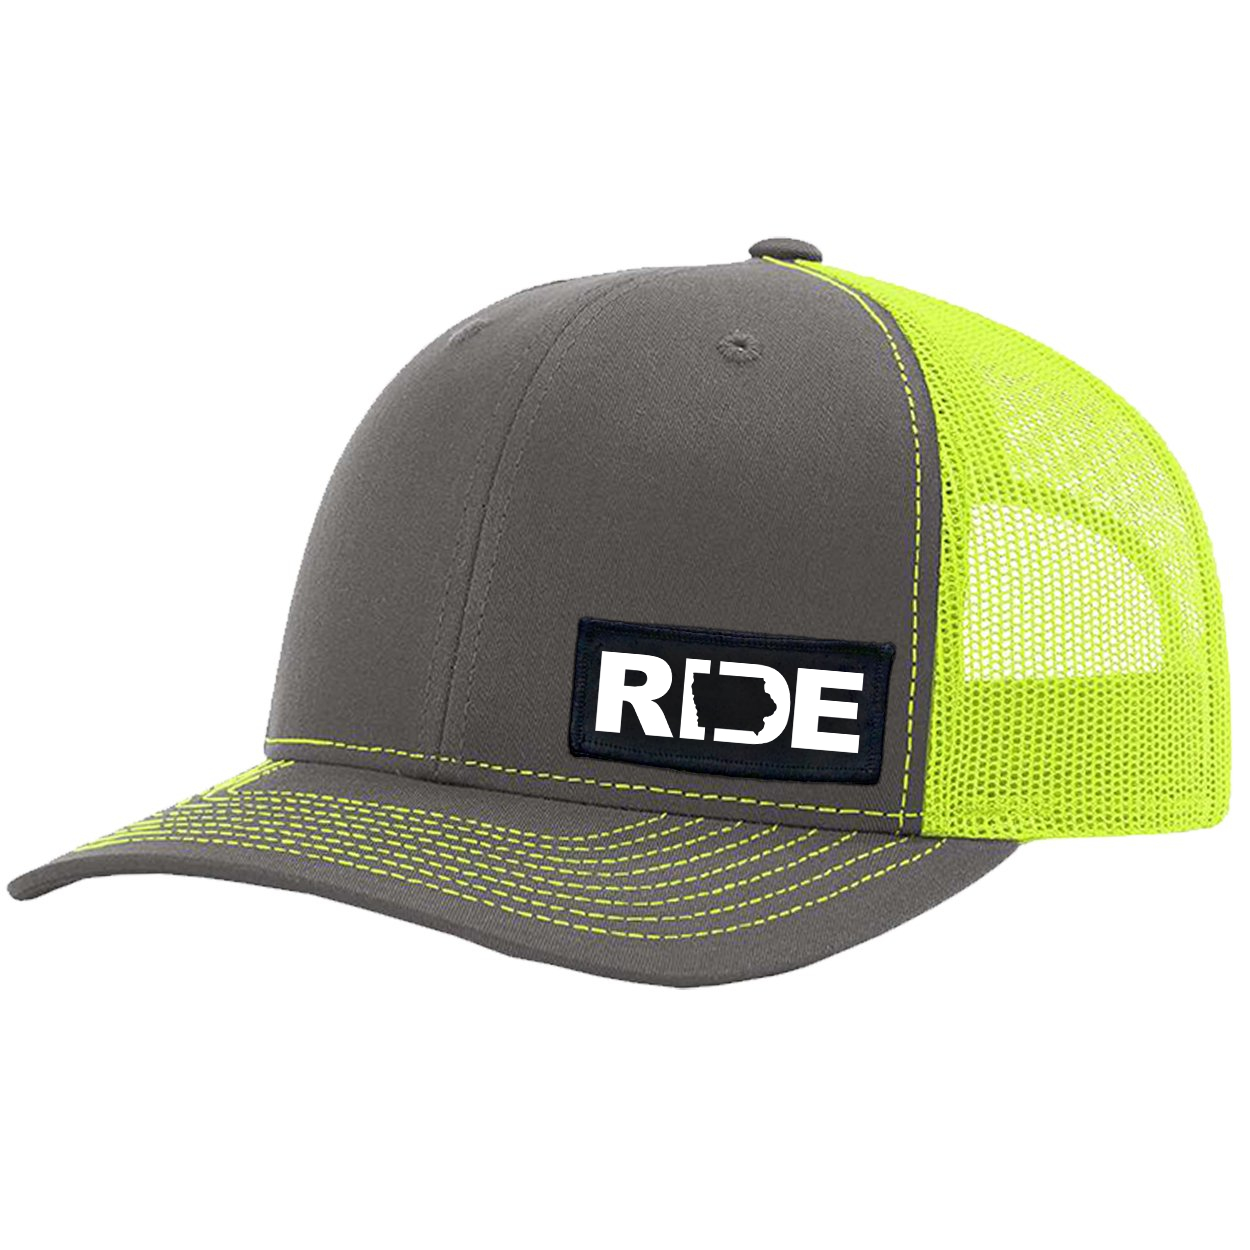 Ride Iowa Night Out Woven Patch Snapback Trucker Hat Charcoal/Neon Yellow (White Logo)